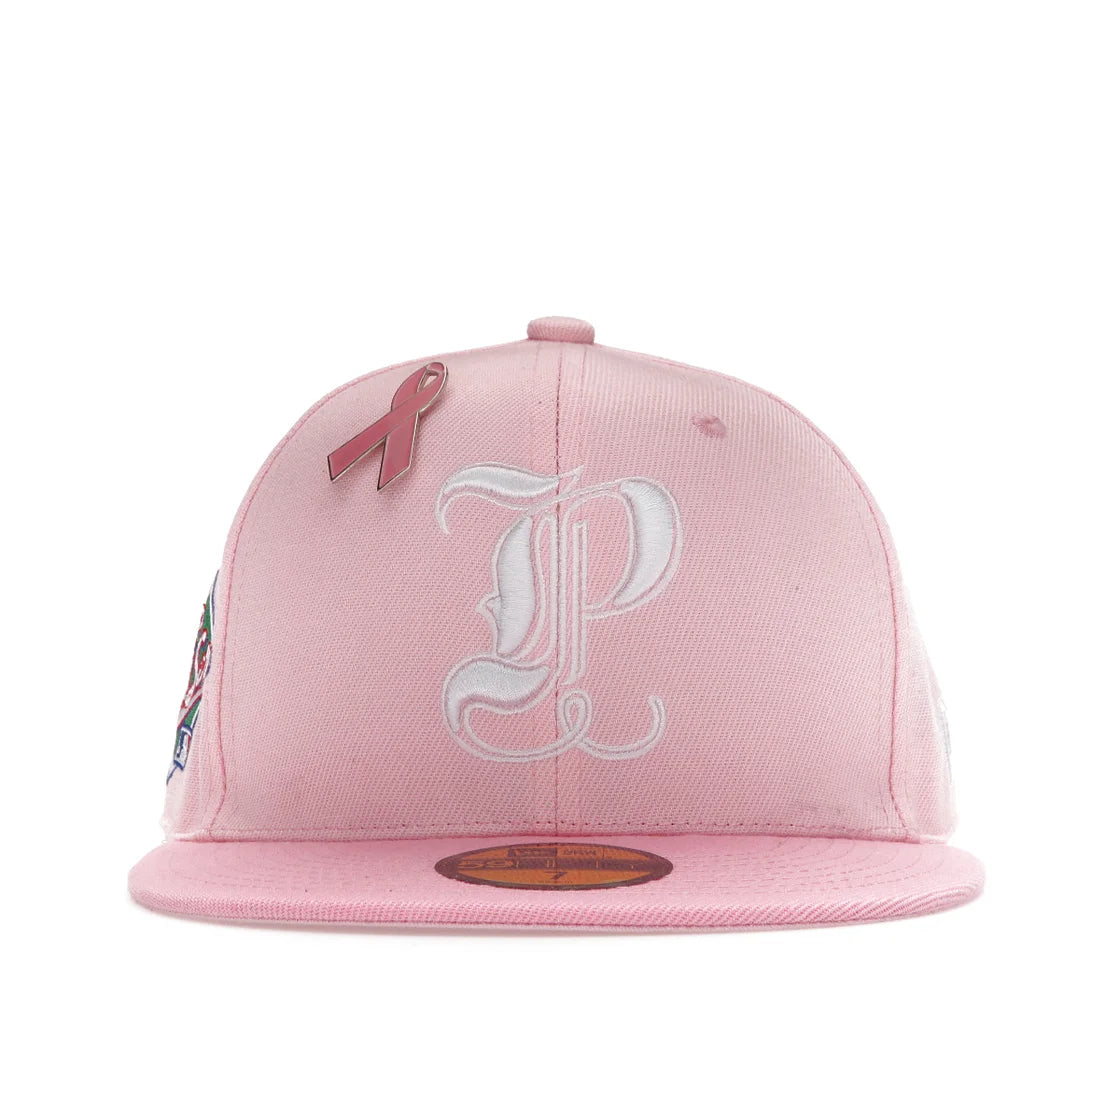 TFP World Series Fitted Cap (Pink)